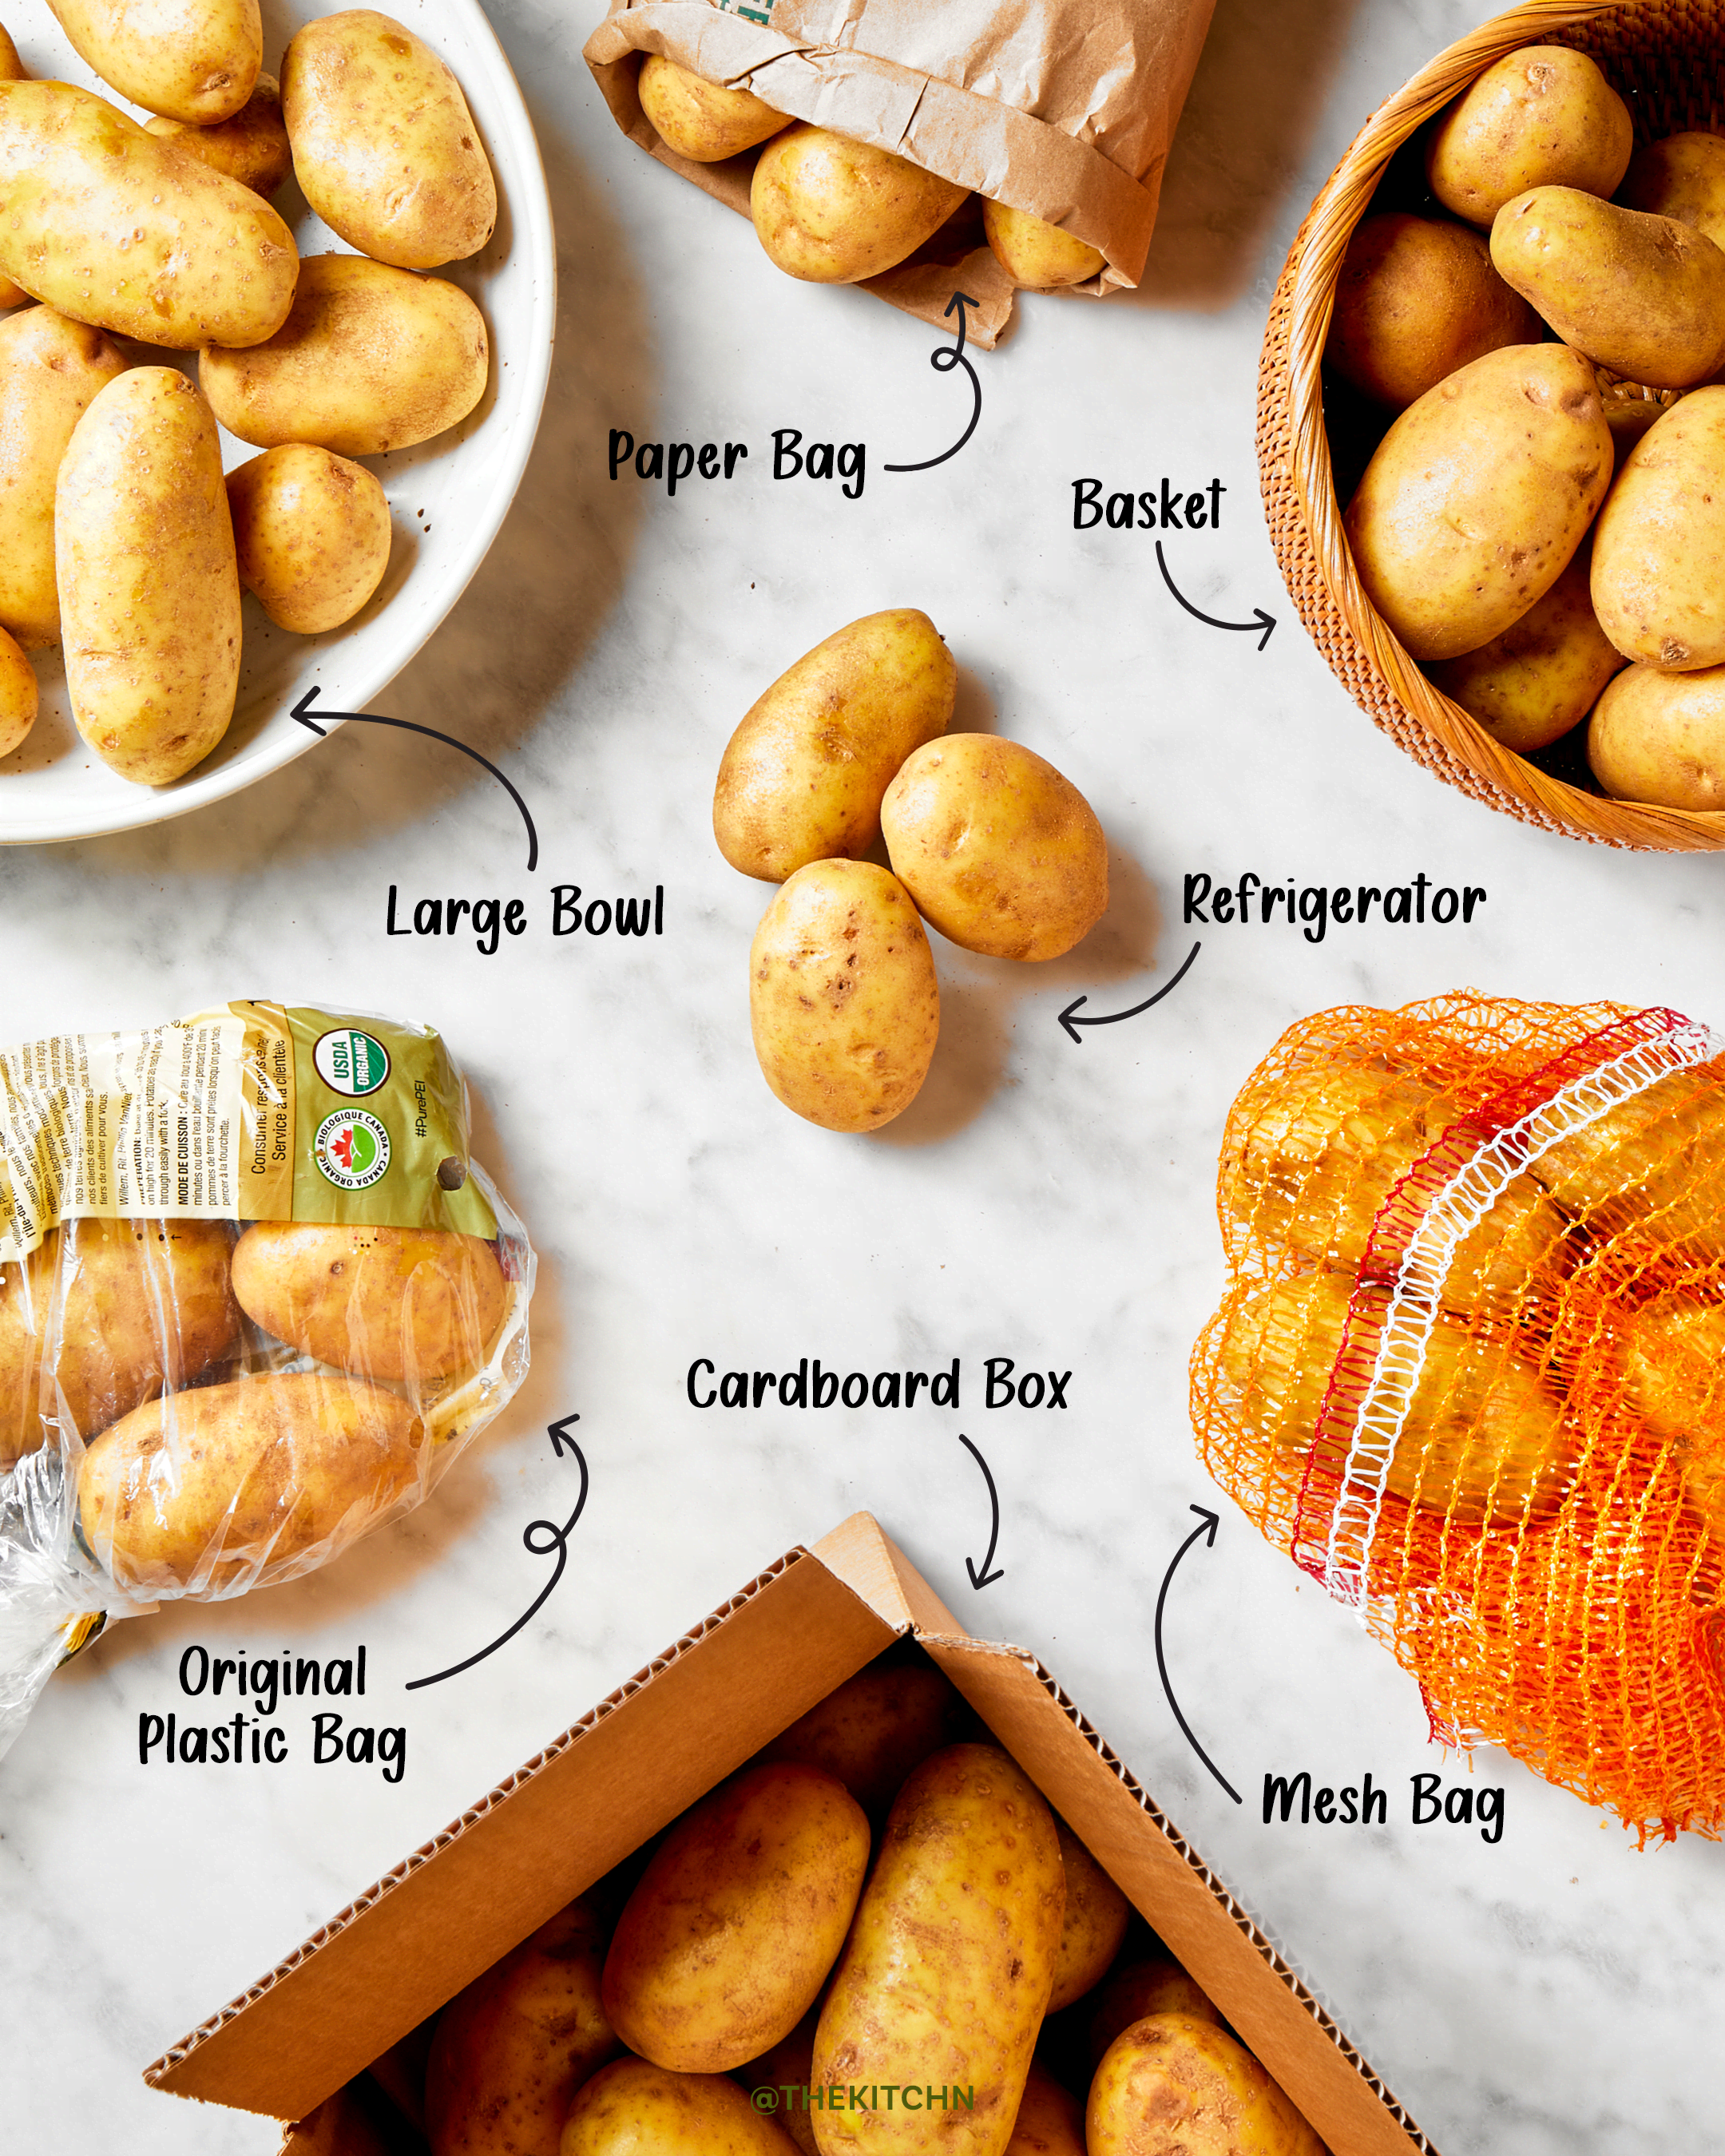 The Ultimate Guide to Different Types of Potatoes - Patricia